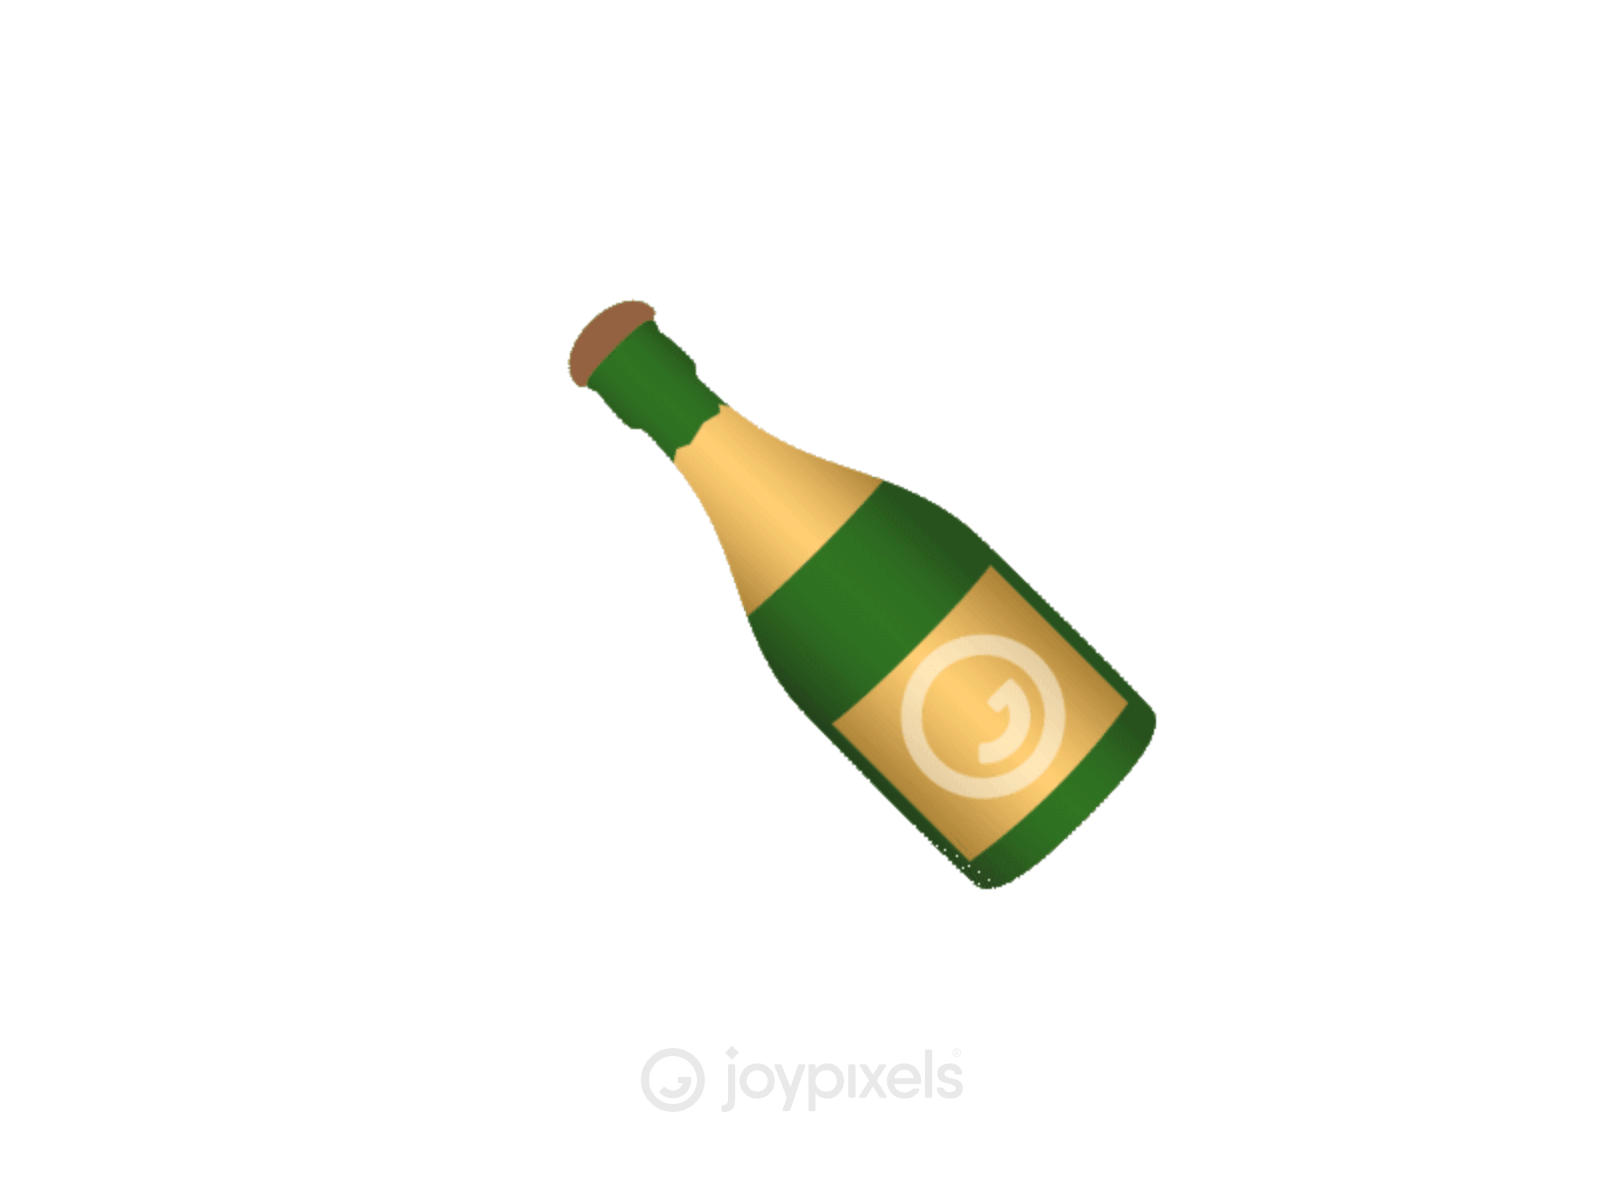 The JoyPixels Bottle with Popping Cork Emoji Animation by